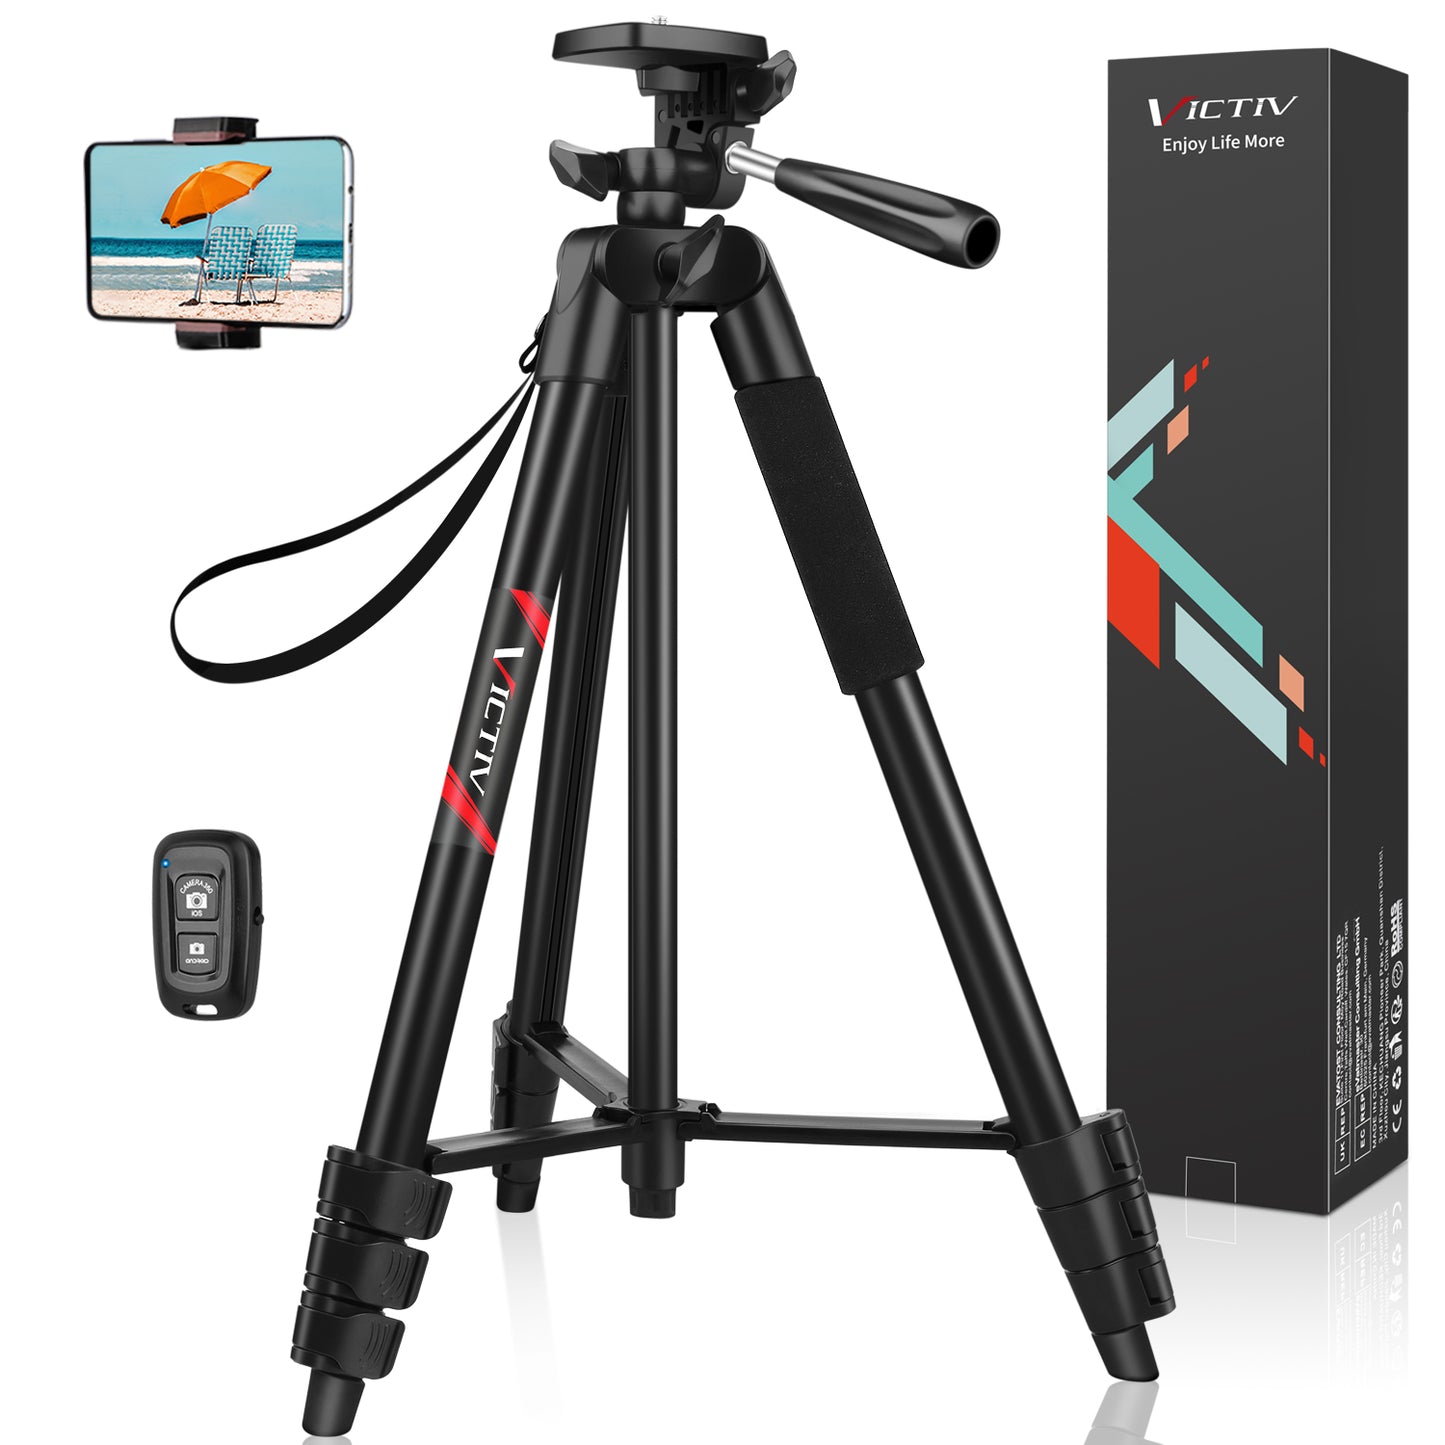 Victiv Phone Tripod, 54" Smartphone Tripod for iPhone, Aluminum Lightweight Portable Camera Tripod Stand for DSLR/Action Camera/Samsung with Phone Holder & Control Remote Shutter